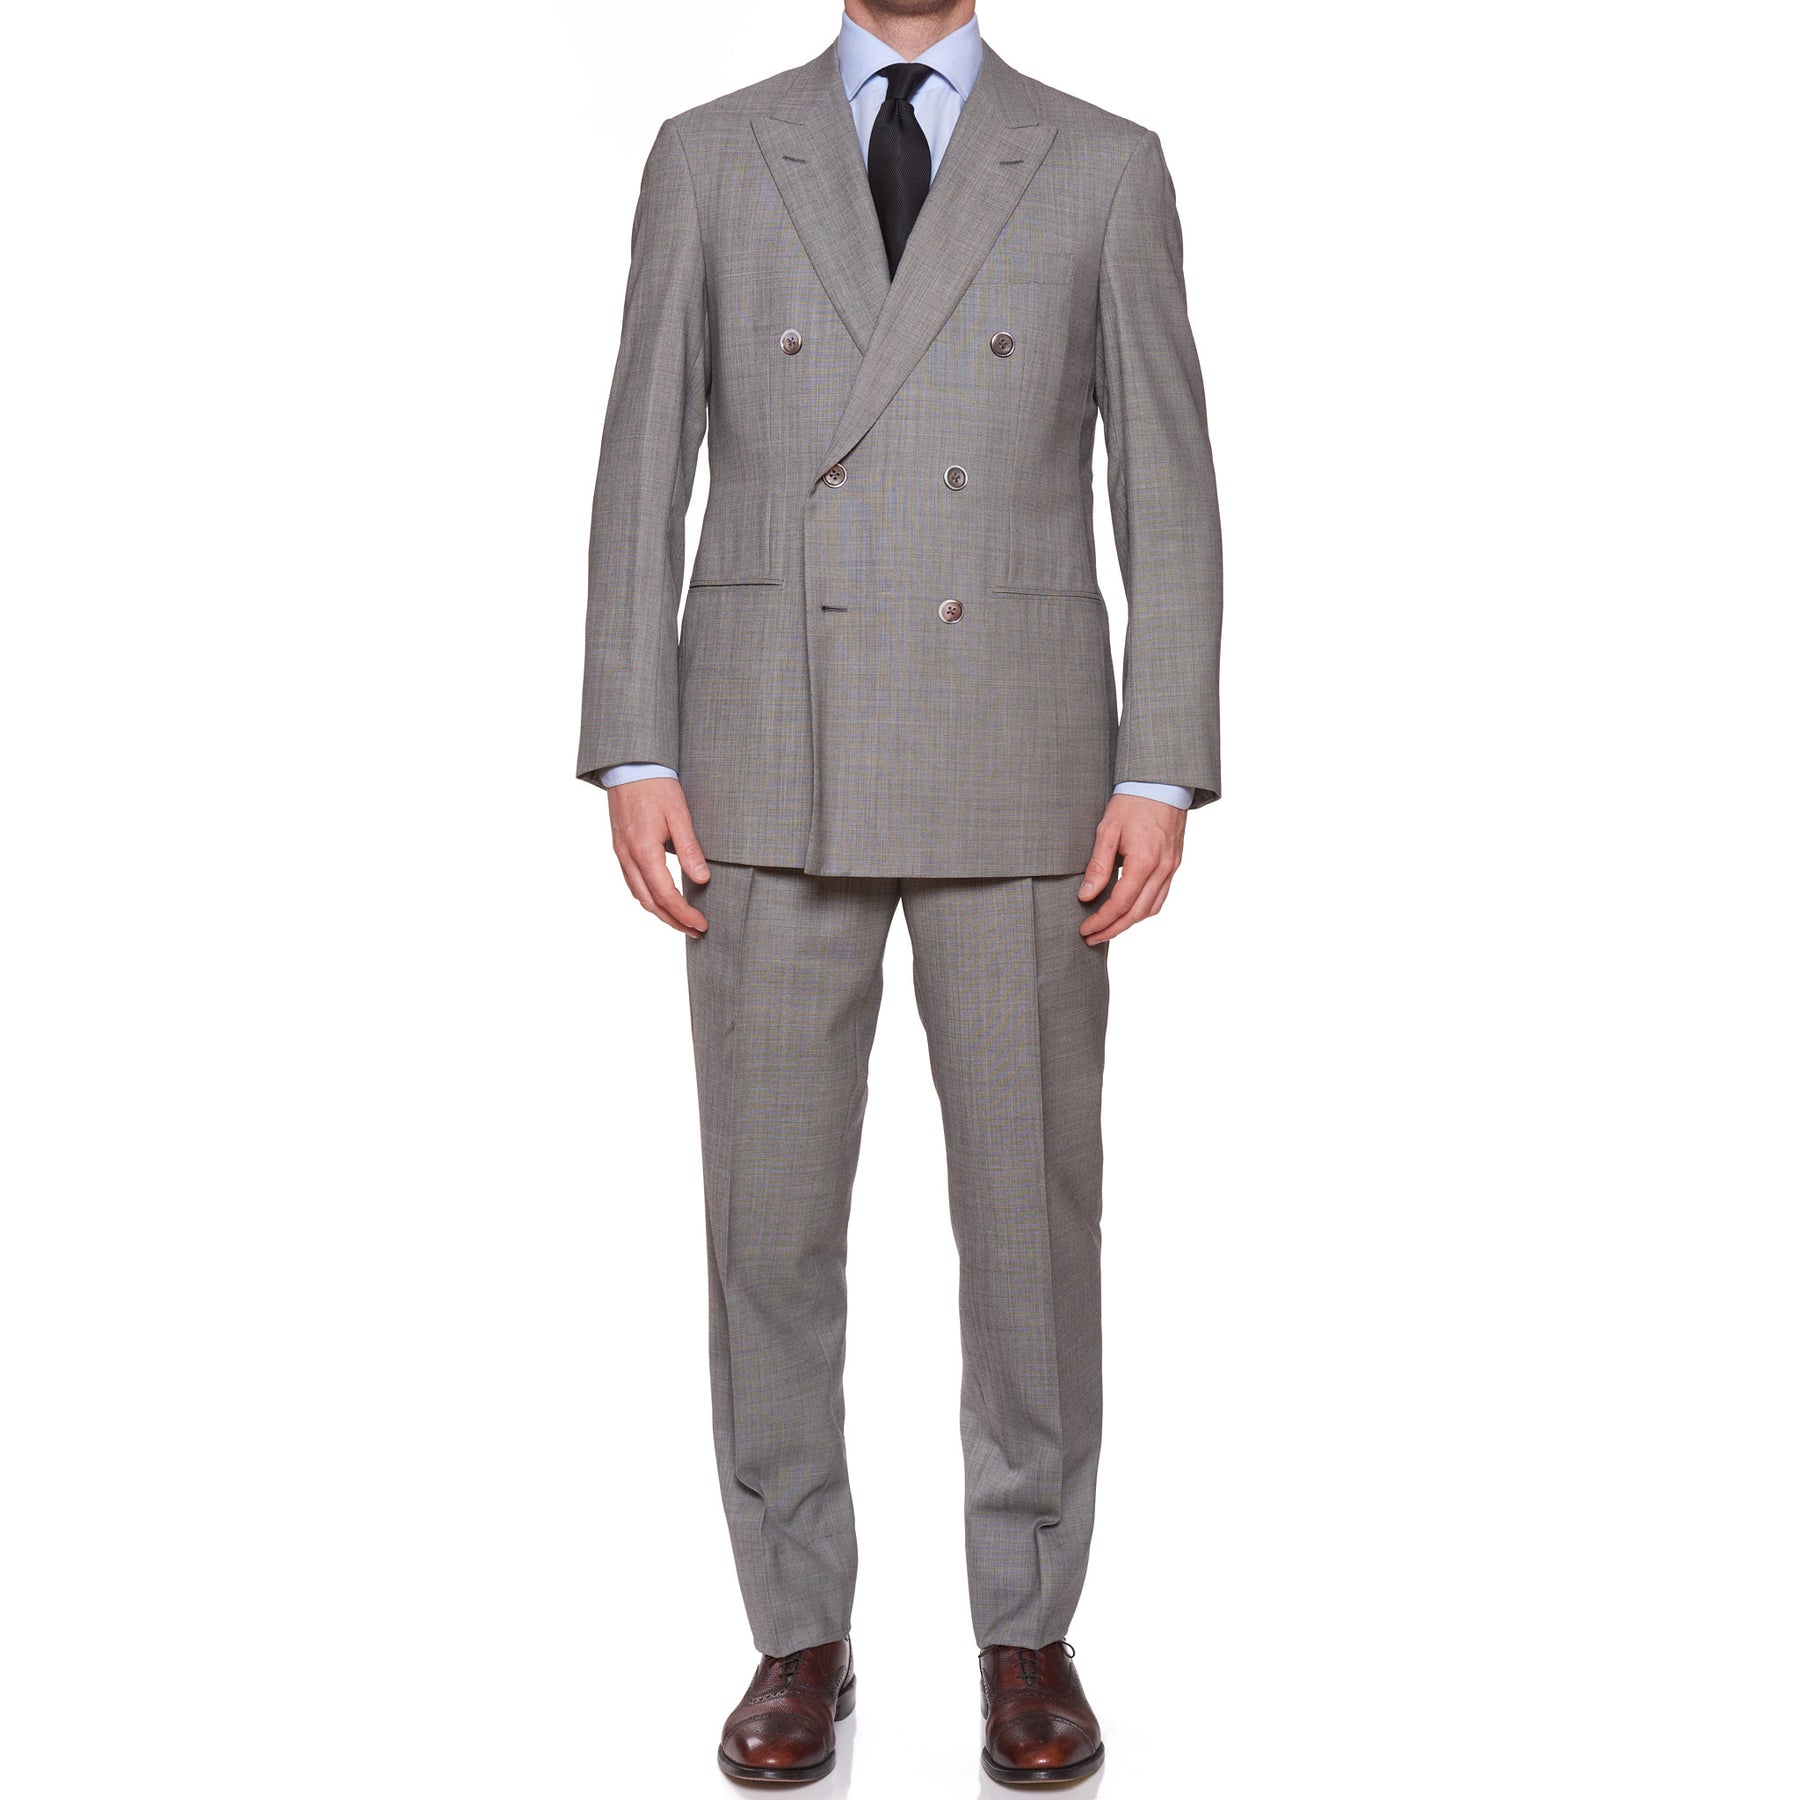 D'AVENZA Handmade Gray Wool Double Breasted Suit EU 52 NEW US 42